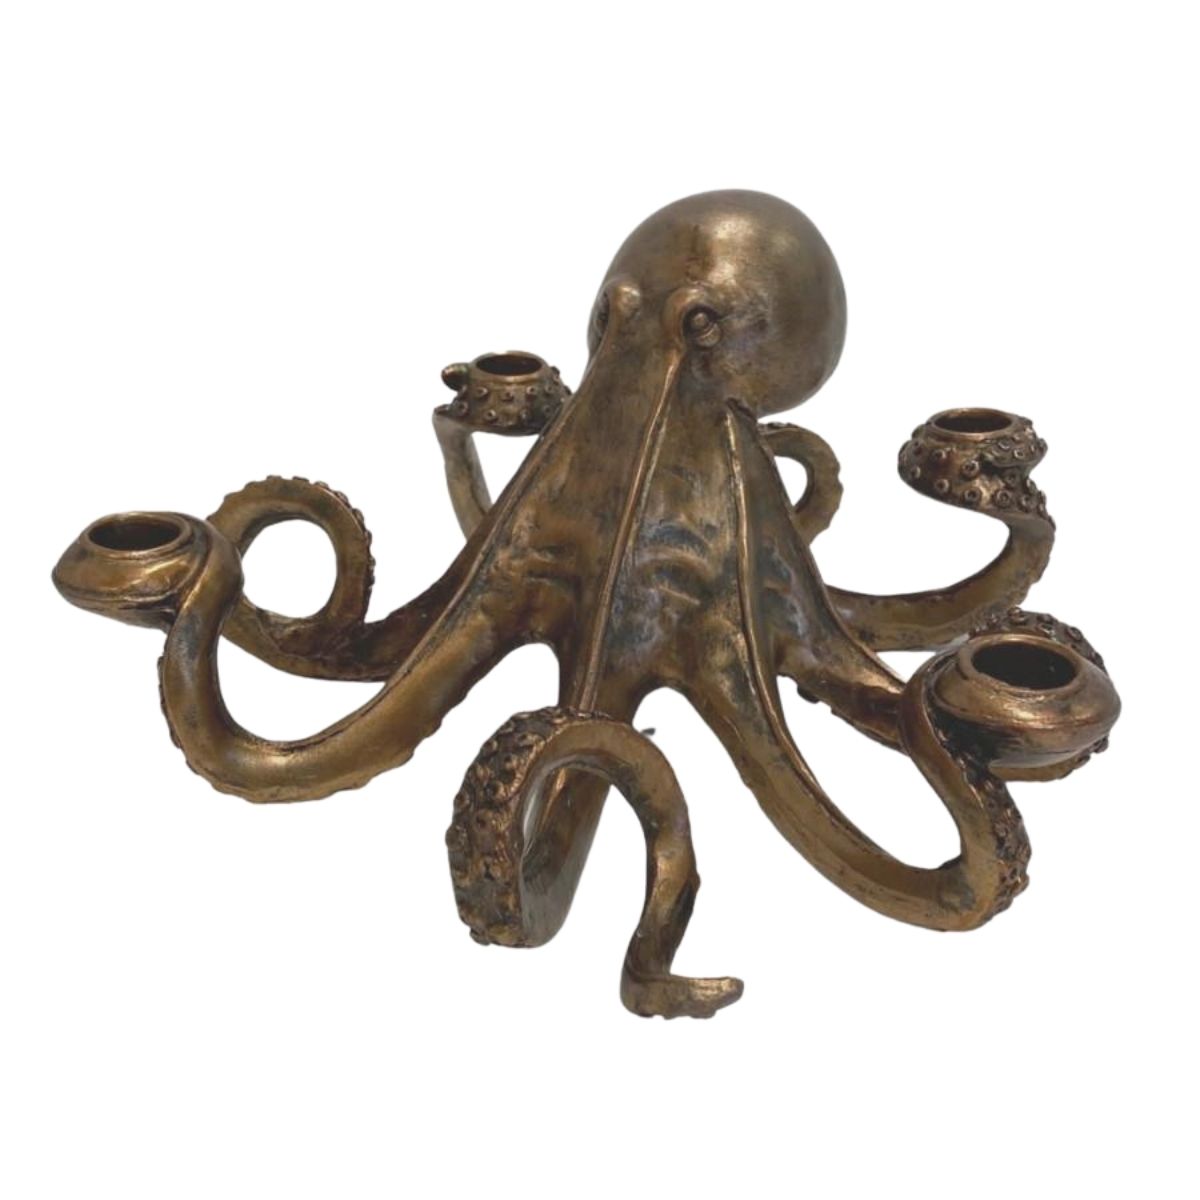 Antique Bronze Octopus Candle Holder – Brown and Ginger